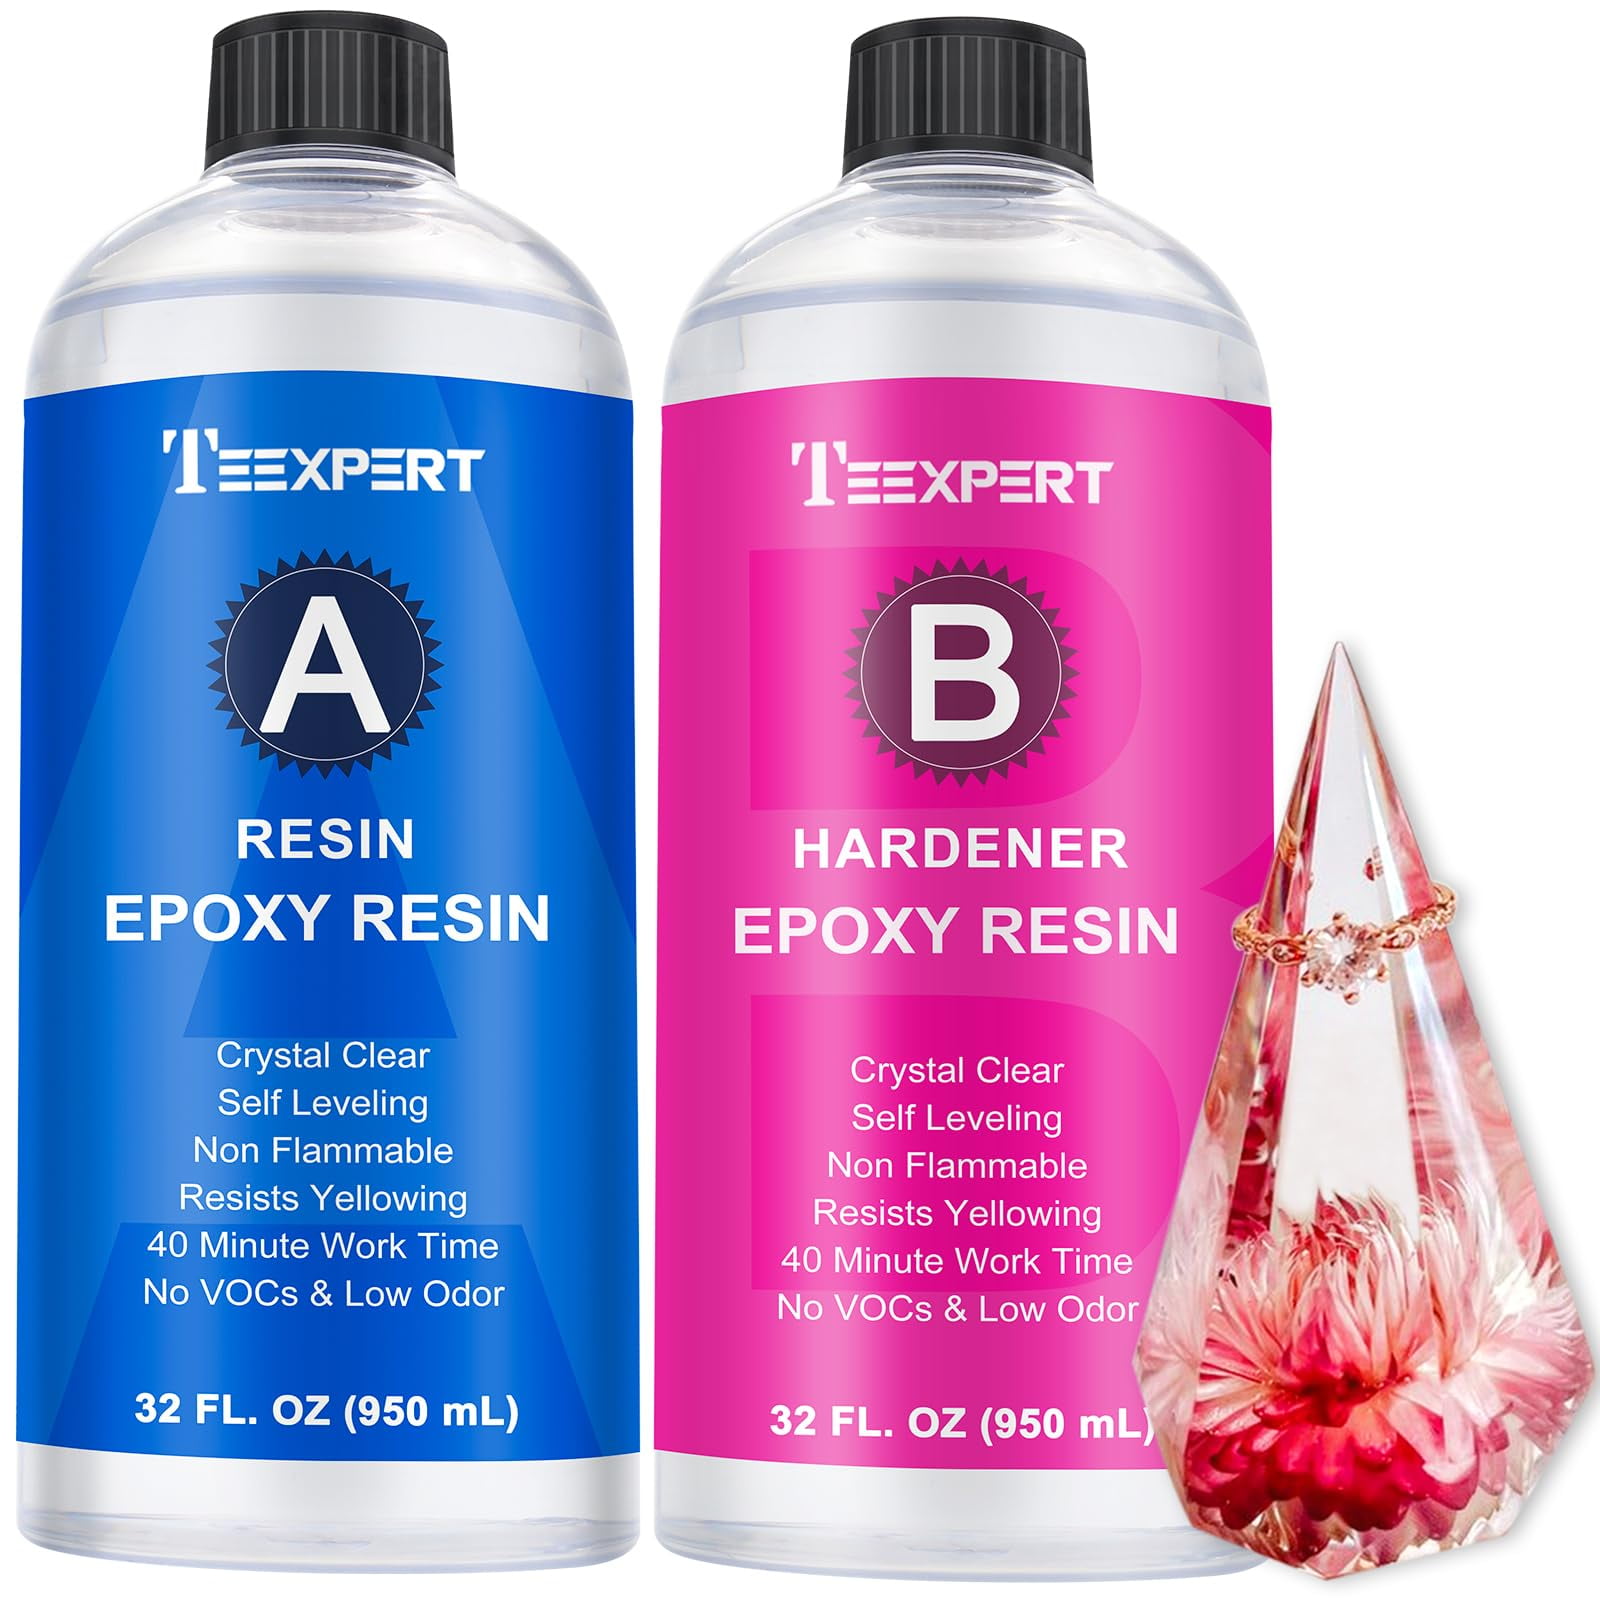 Teexpert Epoxy Resin Kit, 64oz (32oz Resin and 32oz Hardener) High-Performance Resin Epoxy, Self-Leveling, Crystal Clear and Ultra-Glossy, Perfect for